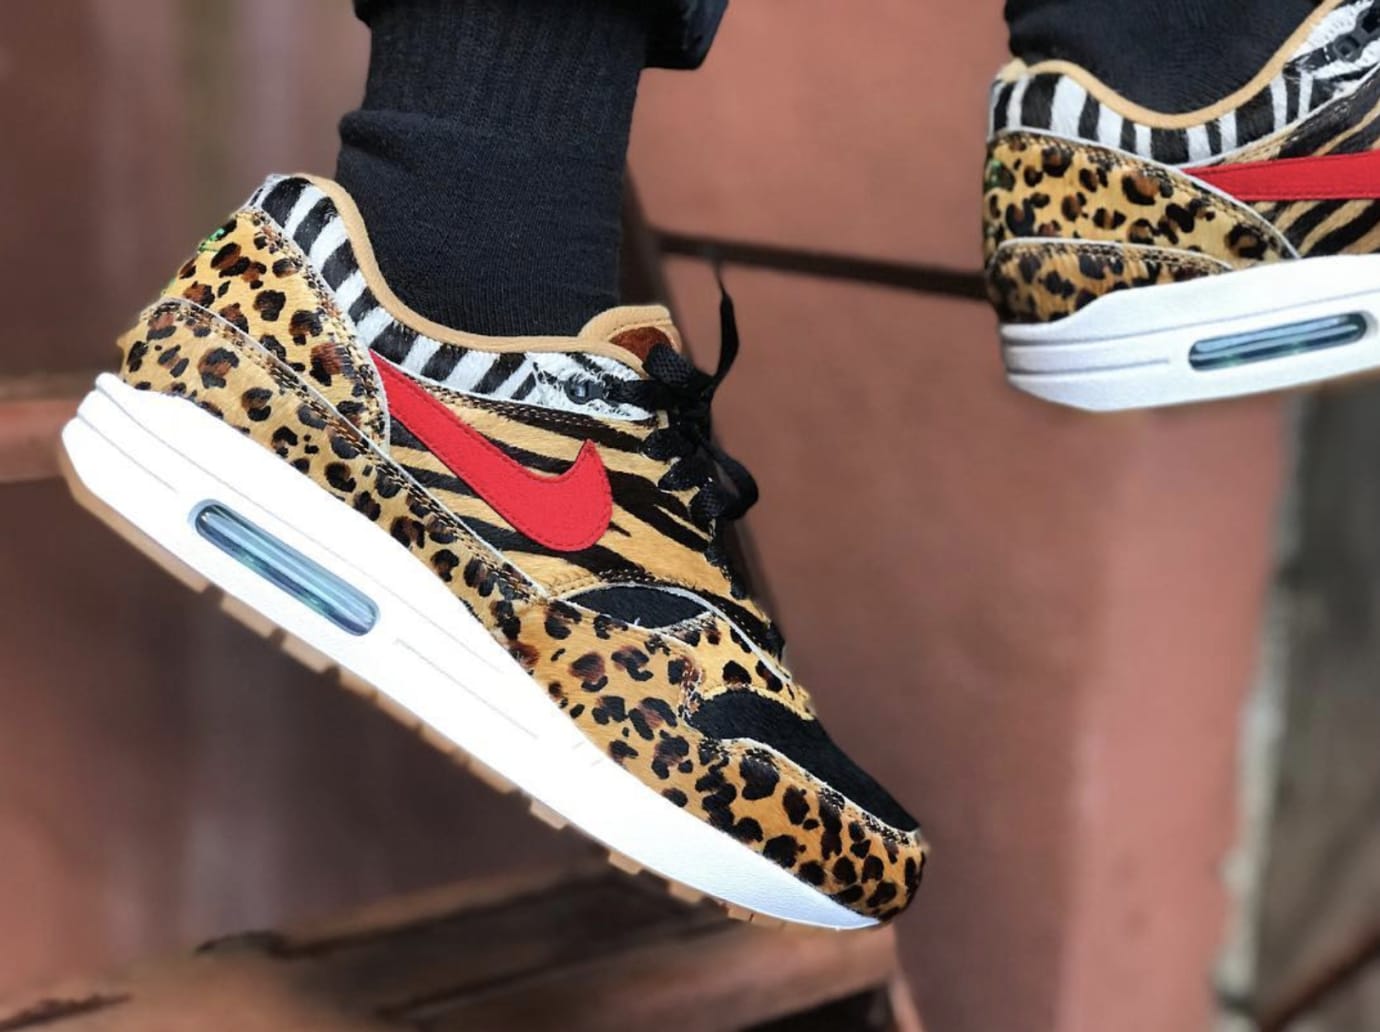 Atmos Nike 'Animal' Pack SNKRS Reservation/NYC Release | Sole Collector